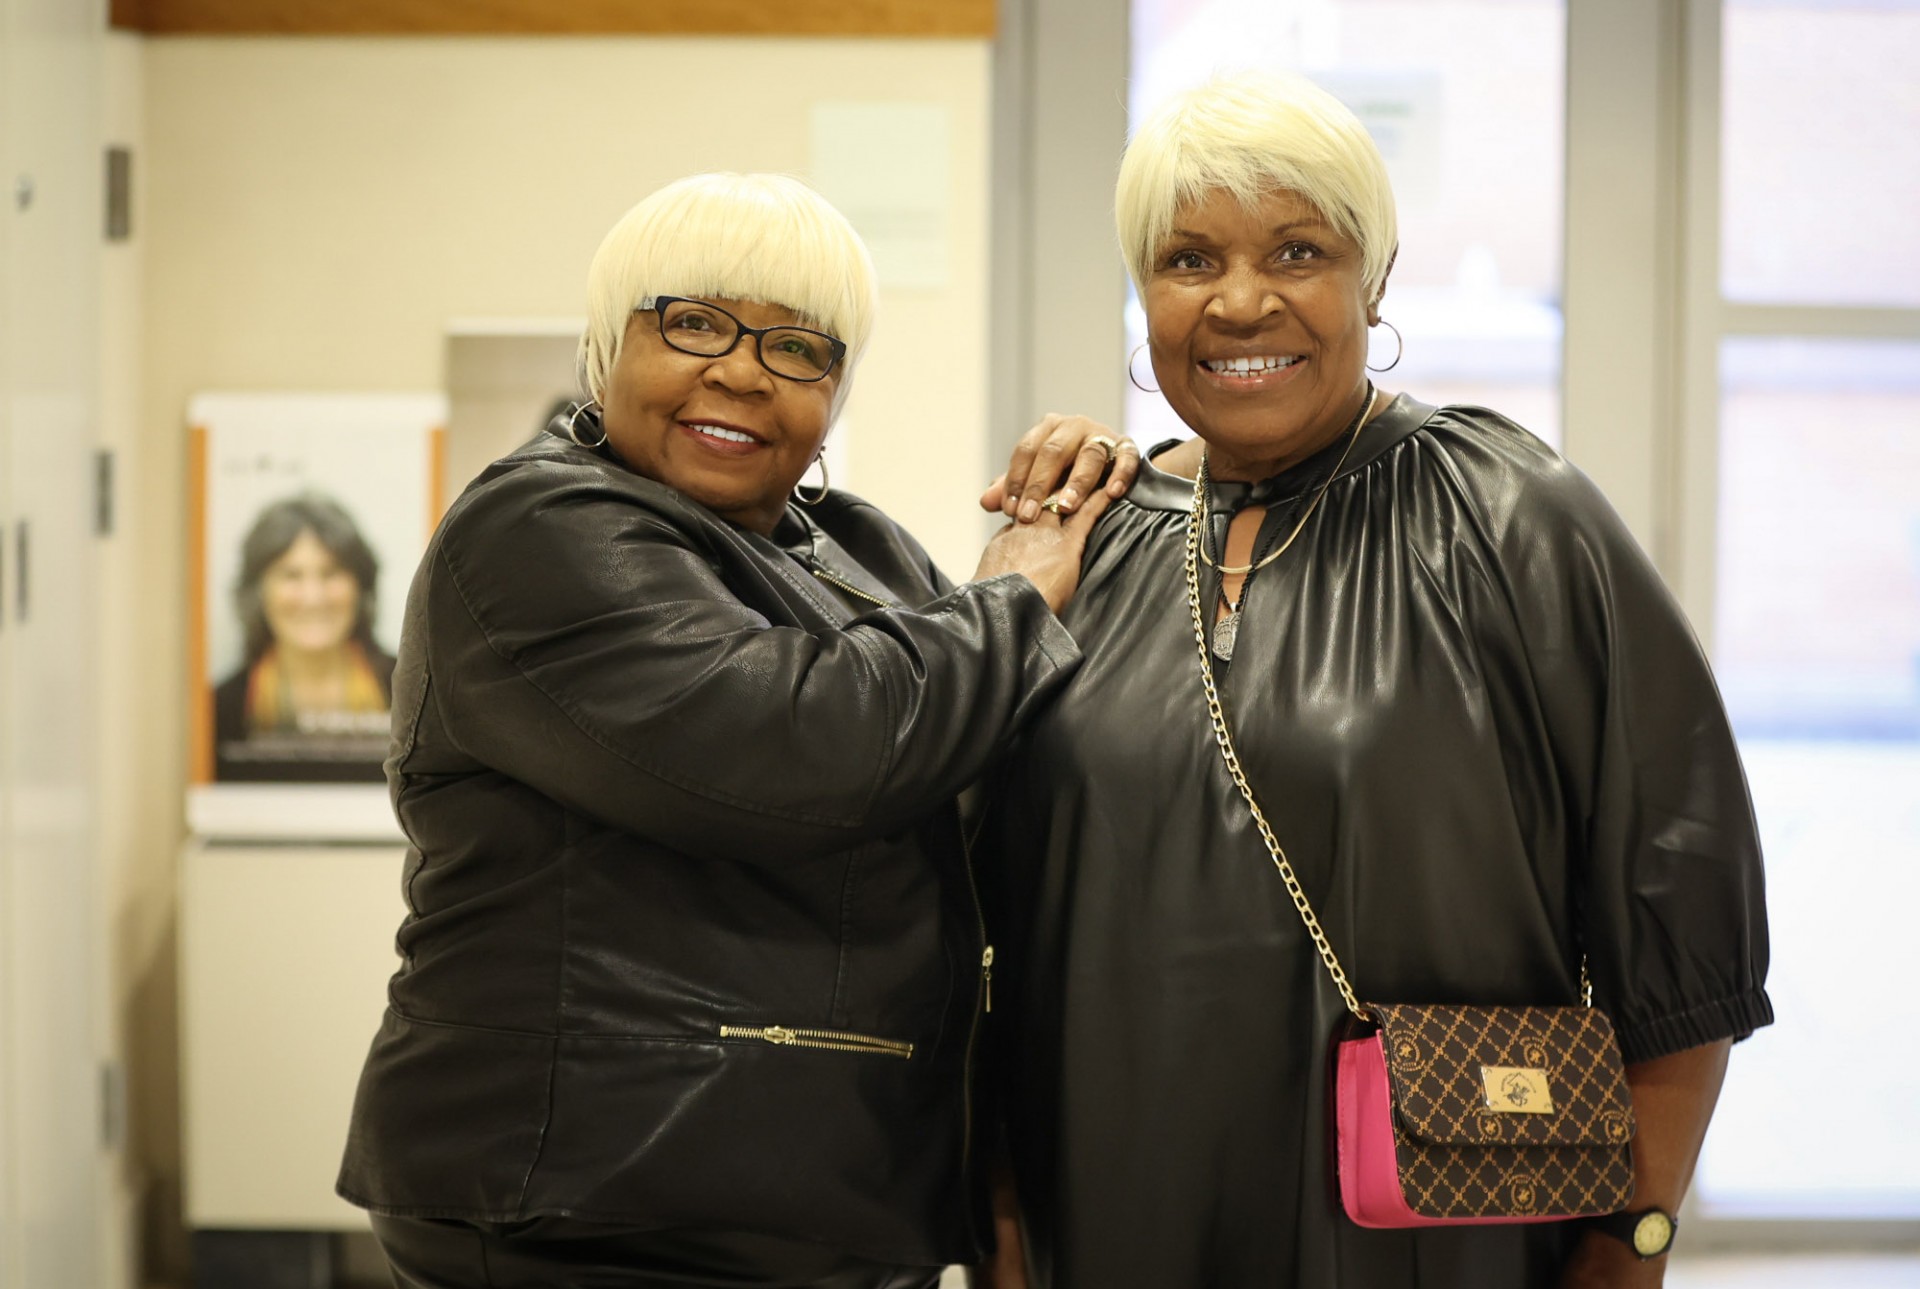 Two Black women, wearing all black, with short light hair standing next to each other posing and smiling